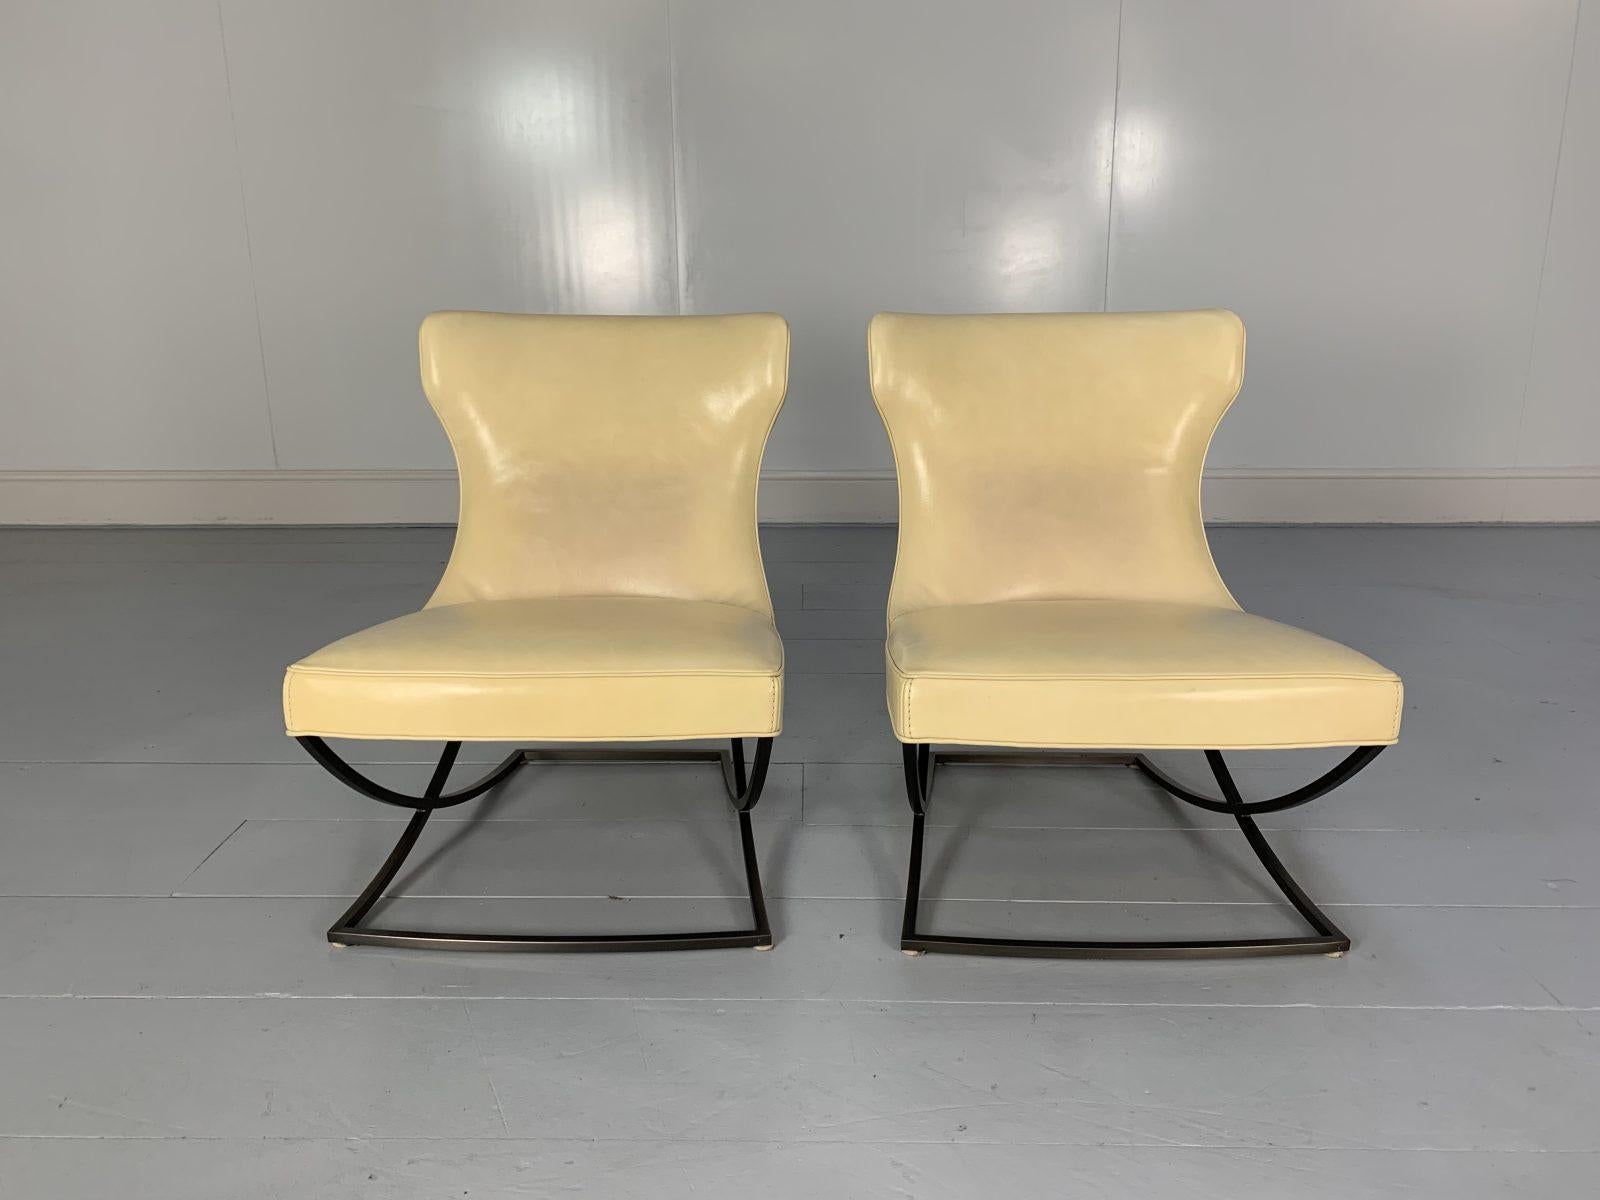 Pair of Baxter “Paloma” Chairs, in Cream Leather In Good Condition For Sale In Barrowford, GB